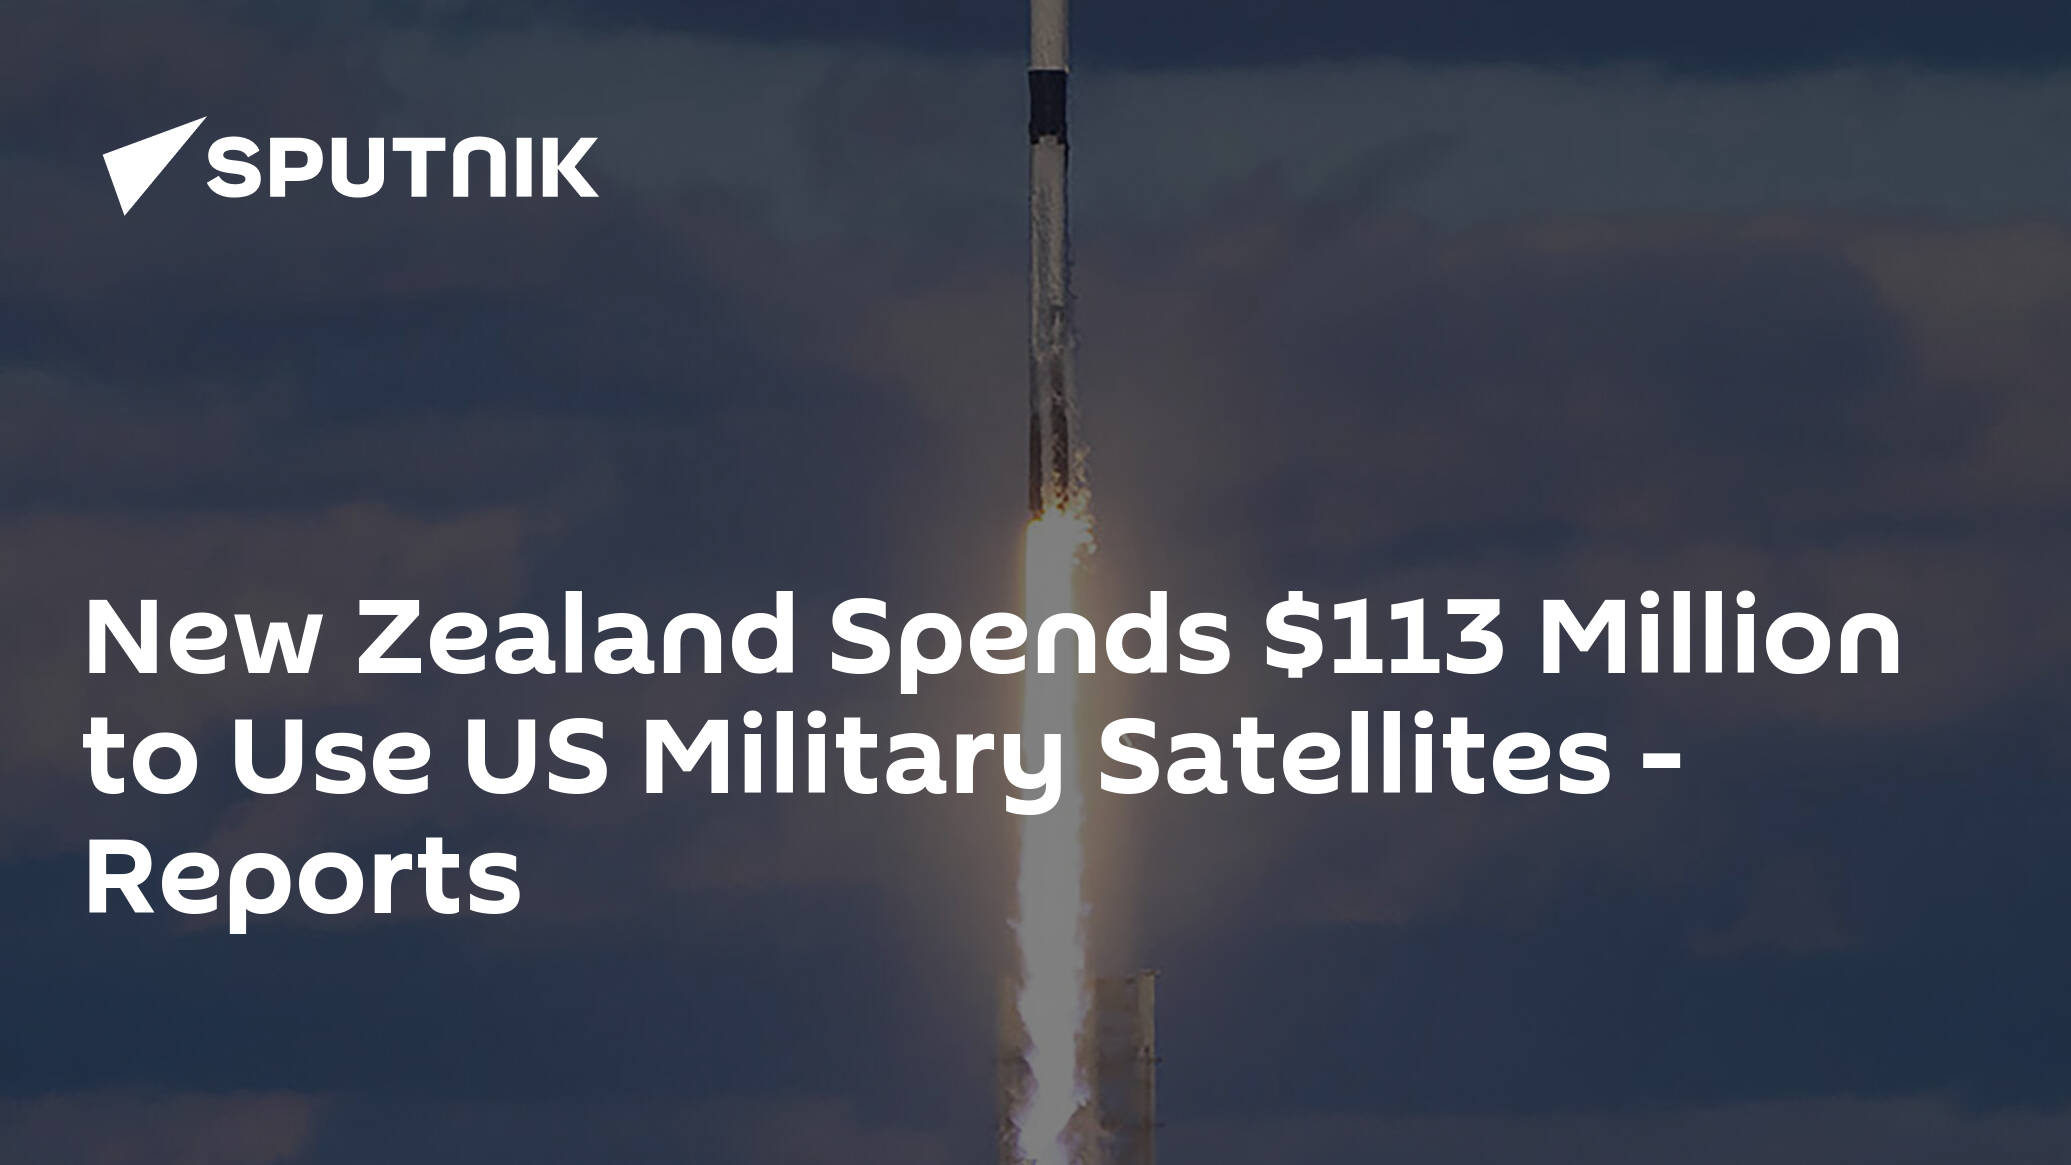 New Zealand Spends 113 Million to Use US Military Satellites